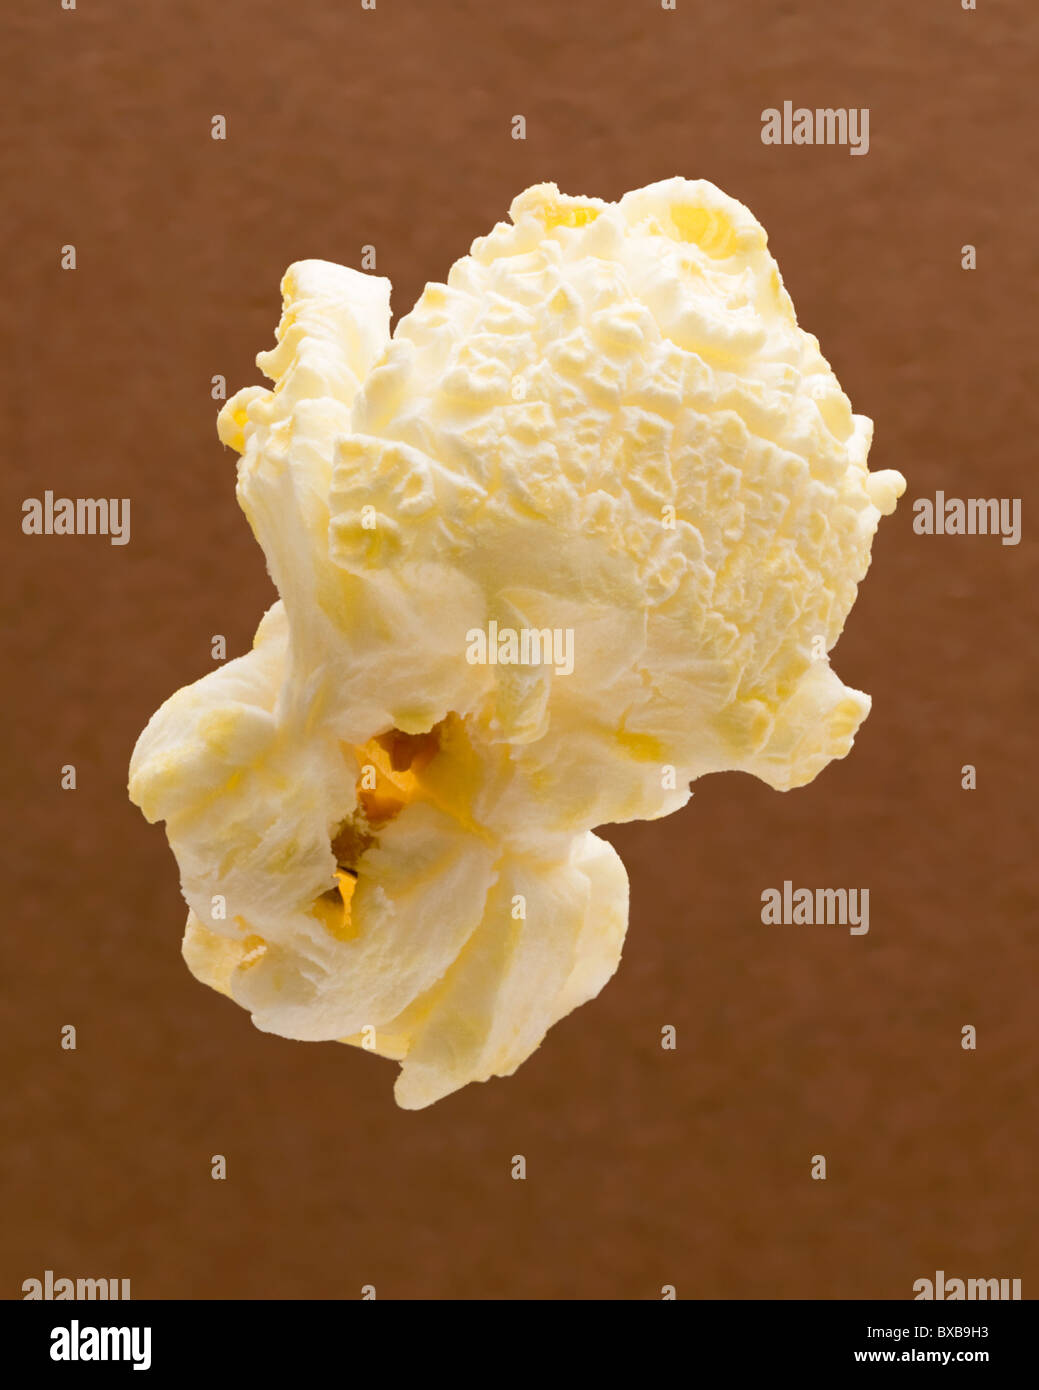 Popcorn isolated on a brown background Stock Photo